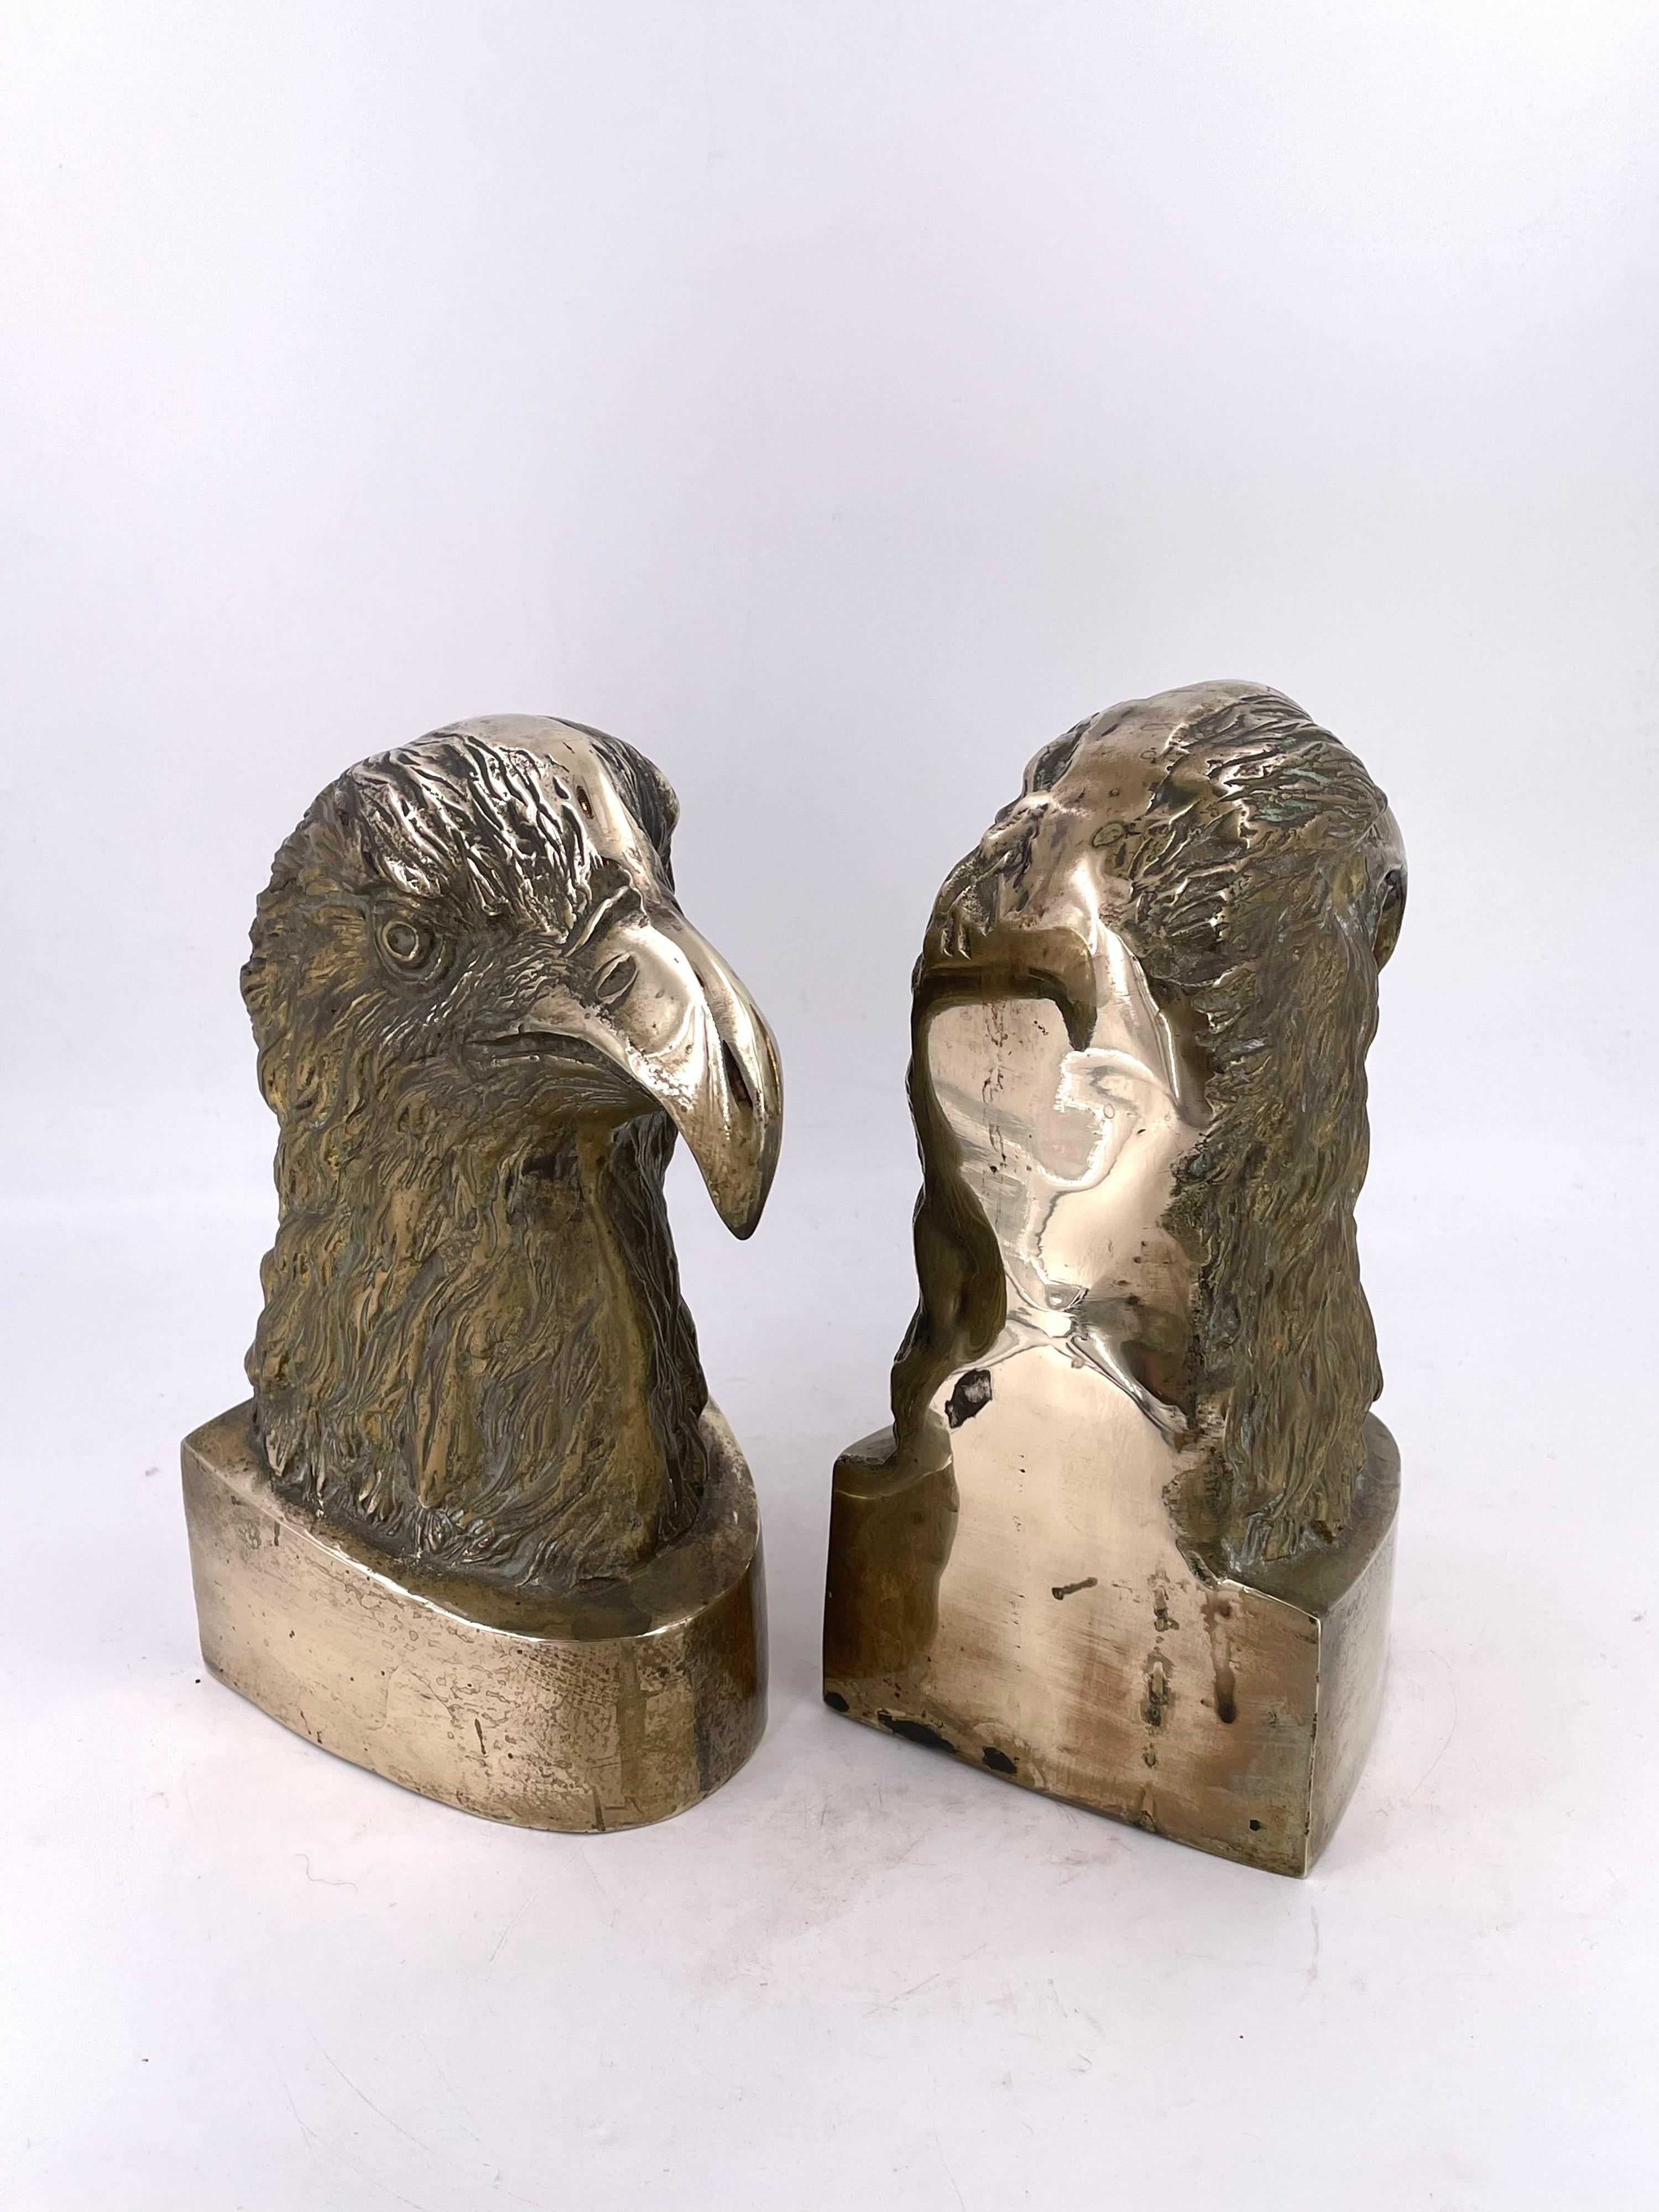 Brass striking American bald eagle bookends from the 1970s. Good weight with nice patina.